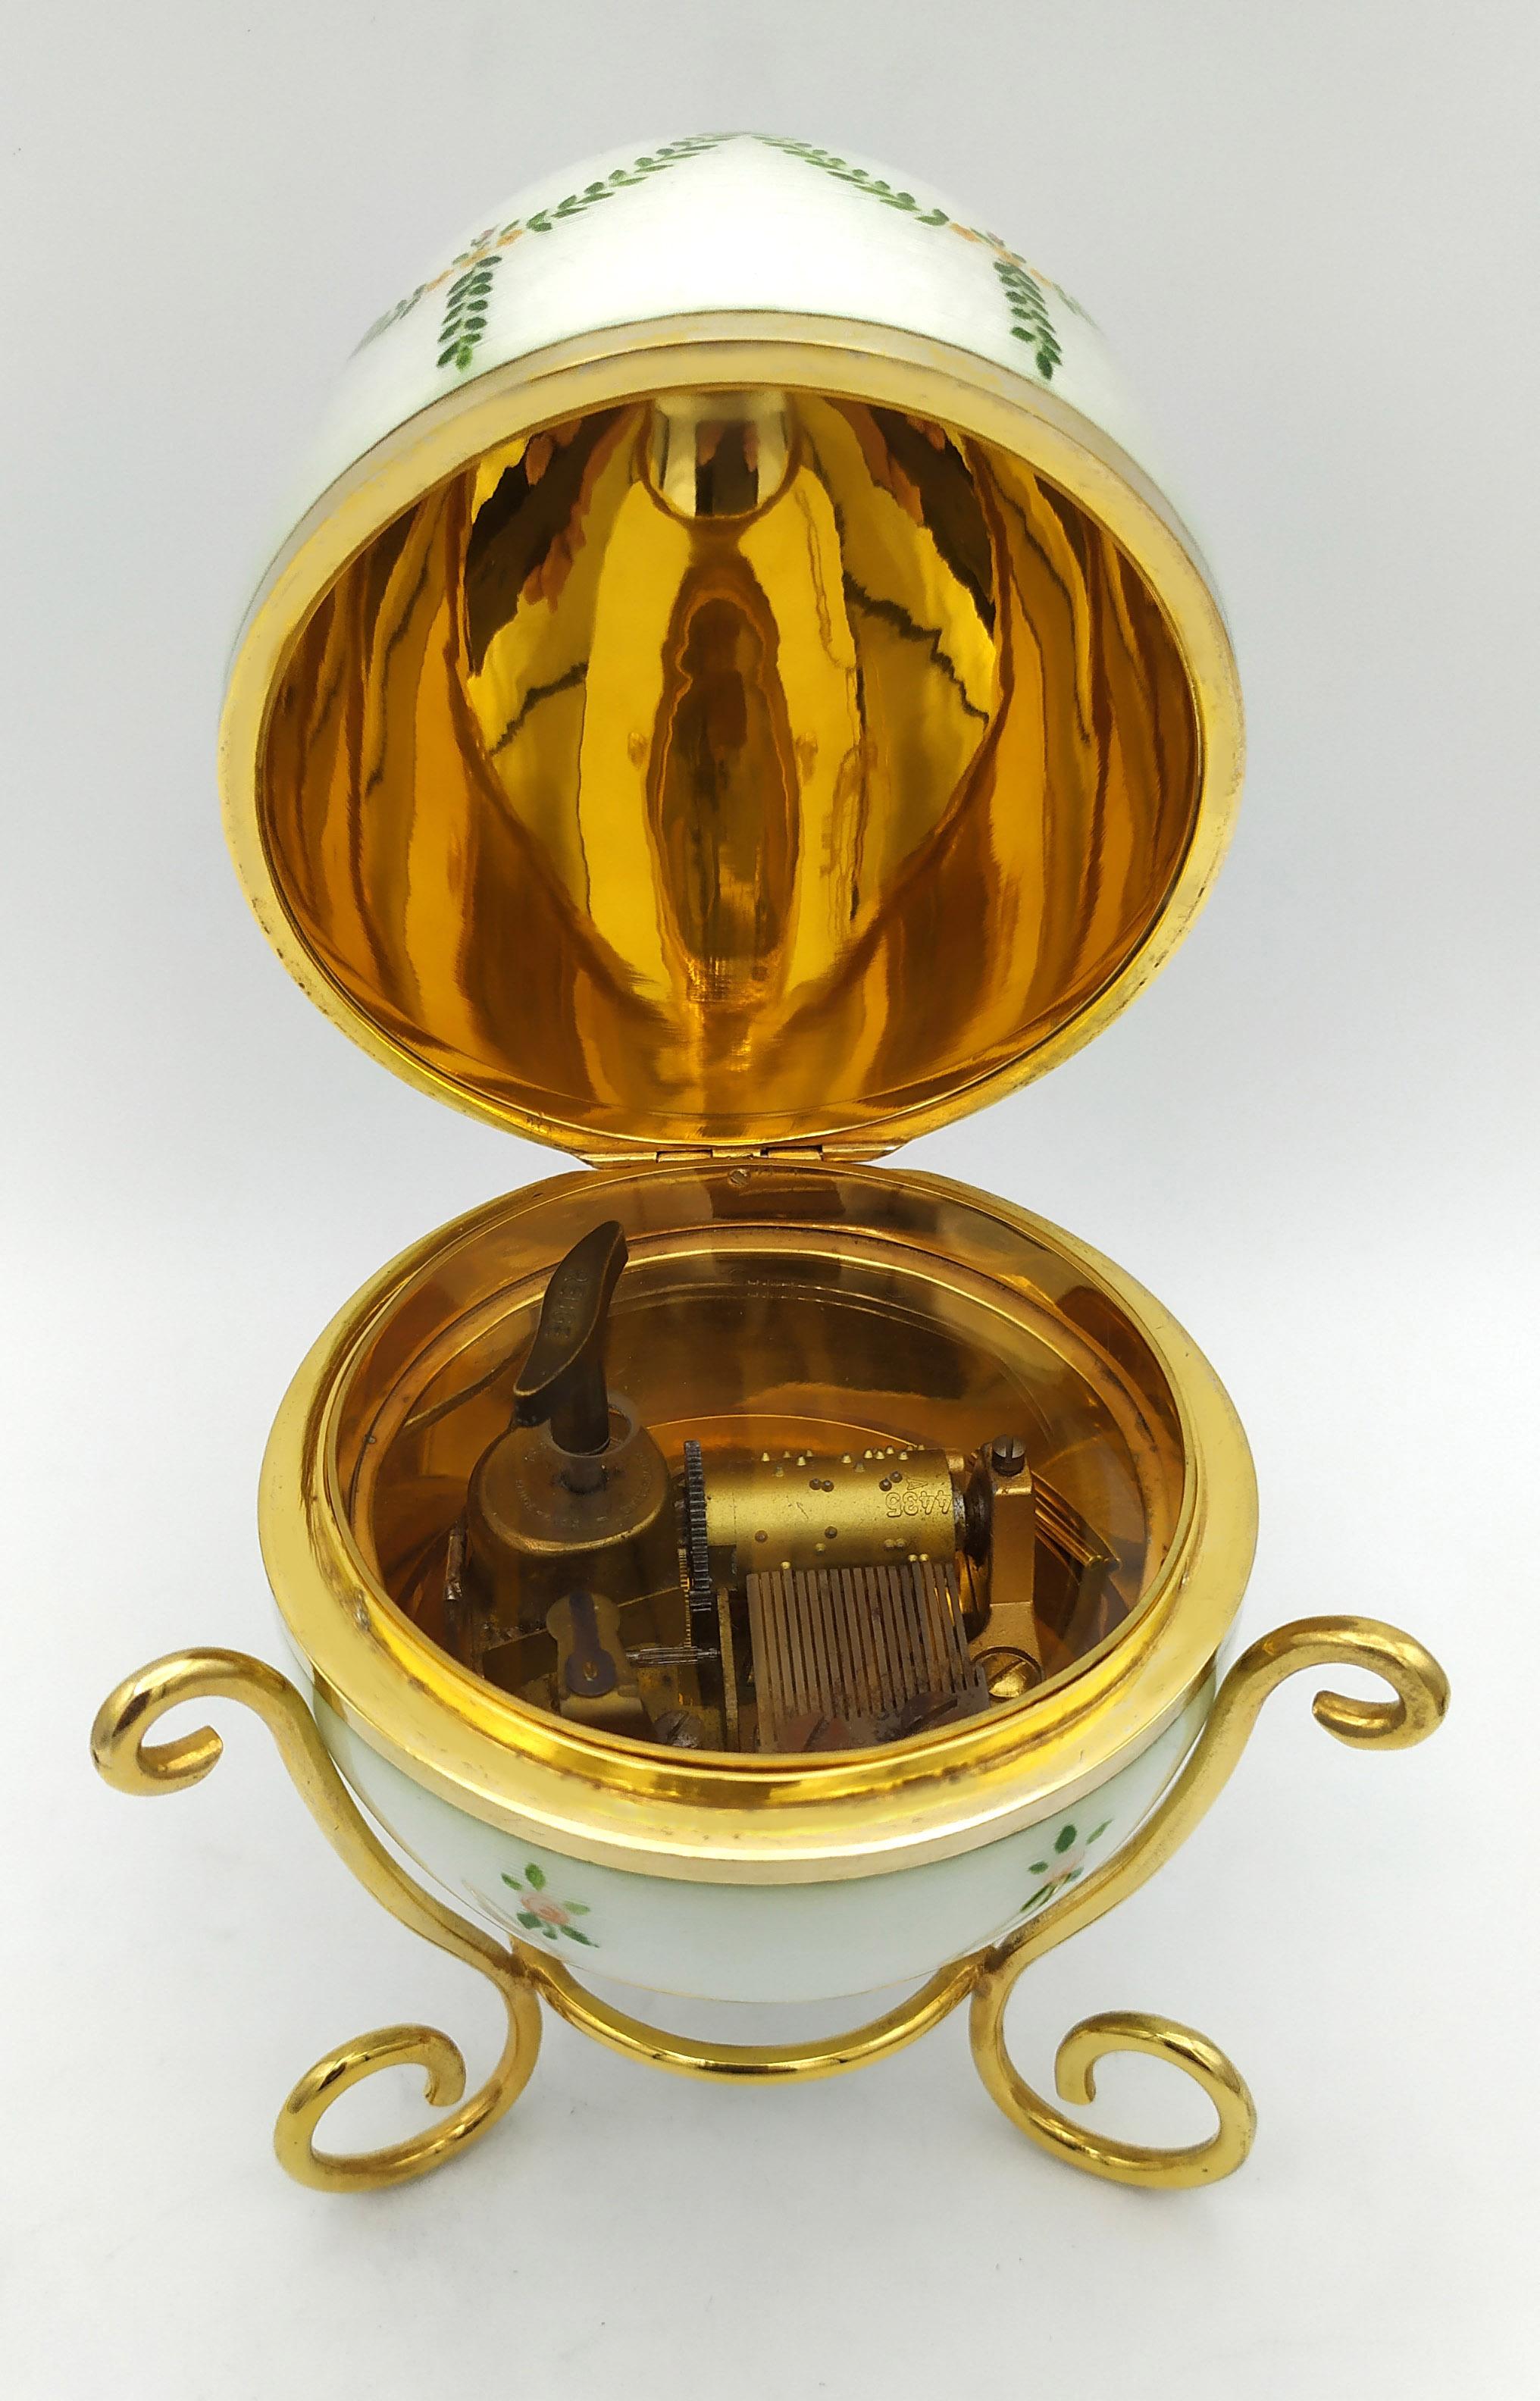 Empire Egg “music box” mechanism by the Swiss Maison Reuge Sterling Silver Salimbeni  For Sale